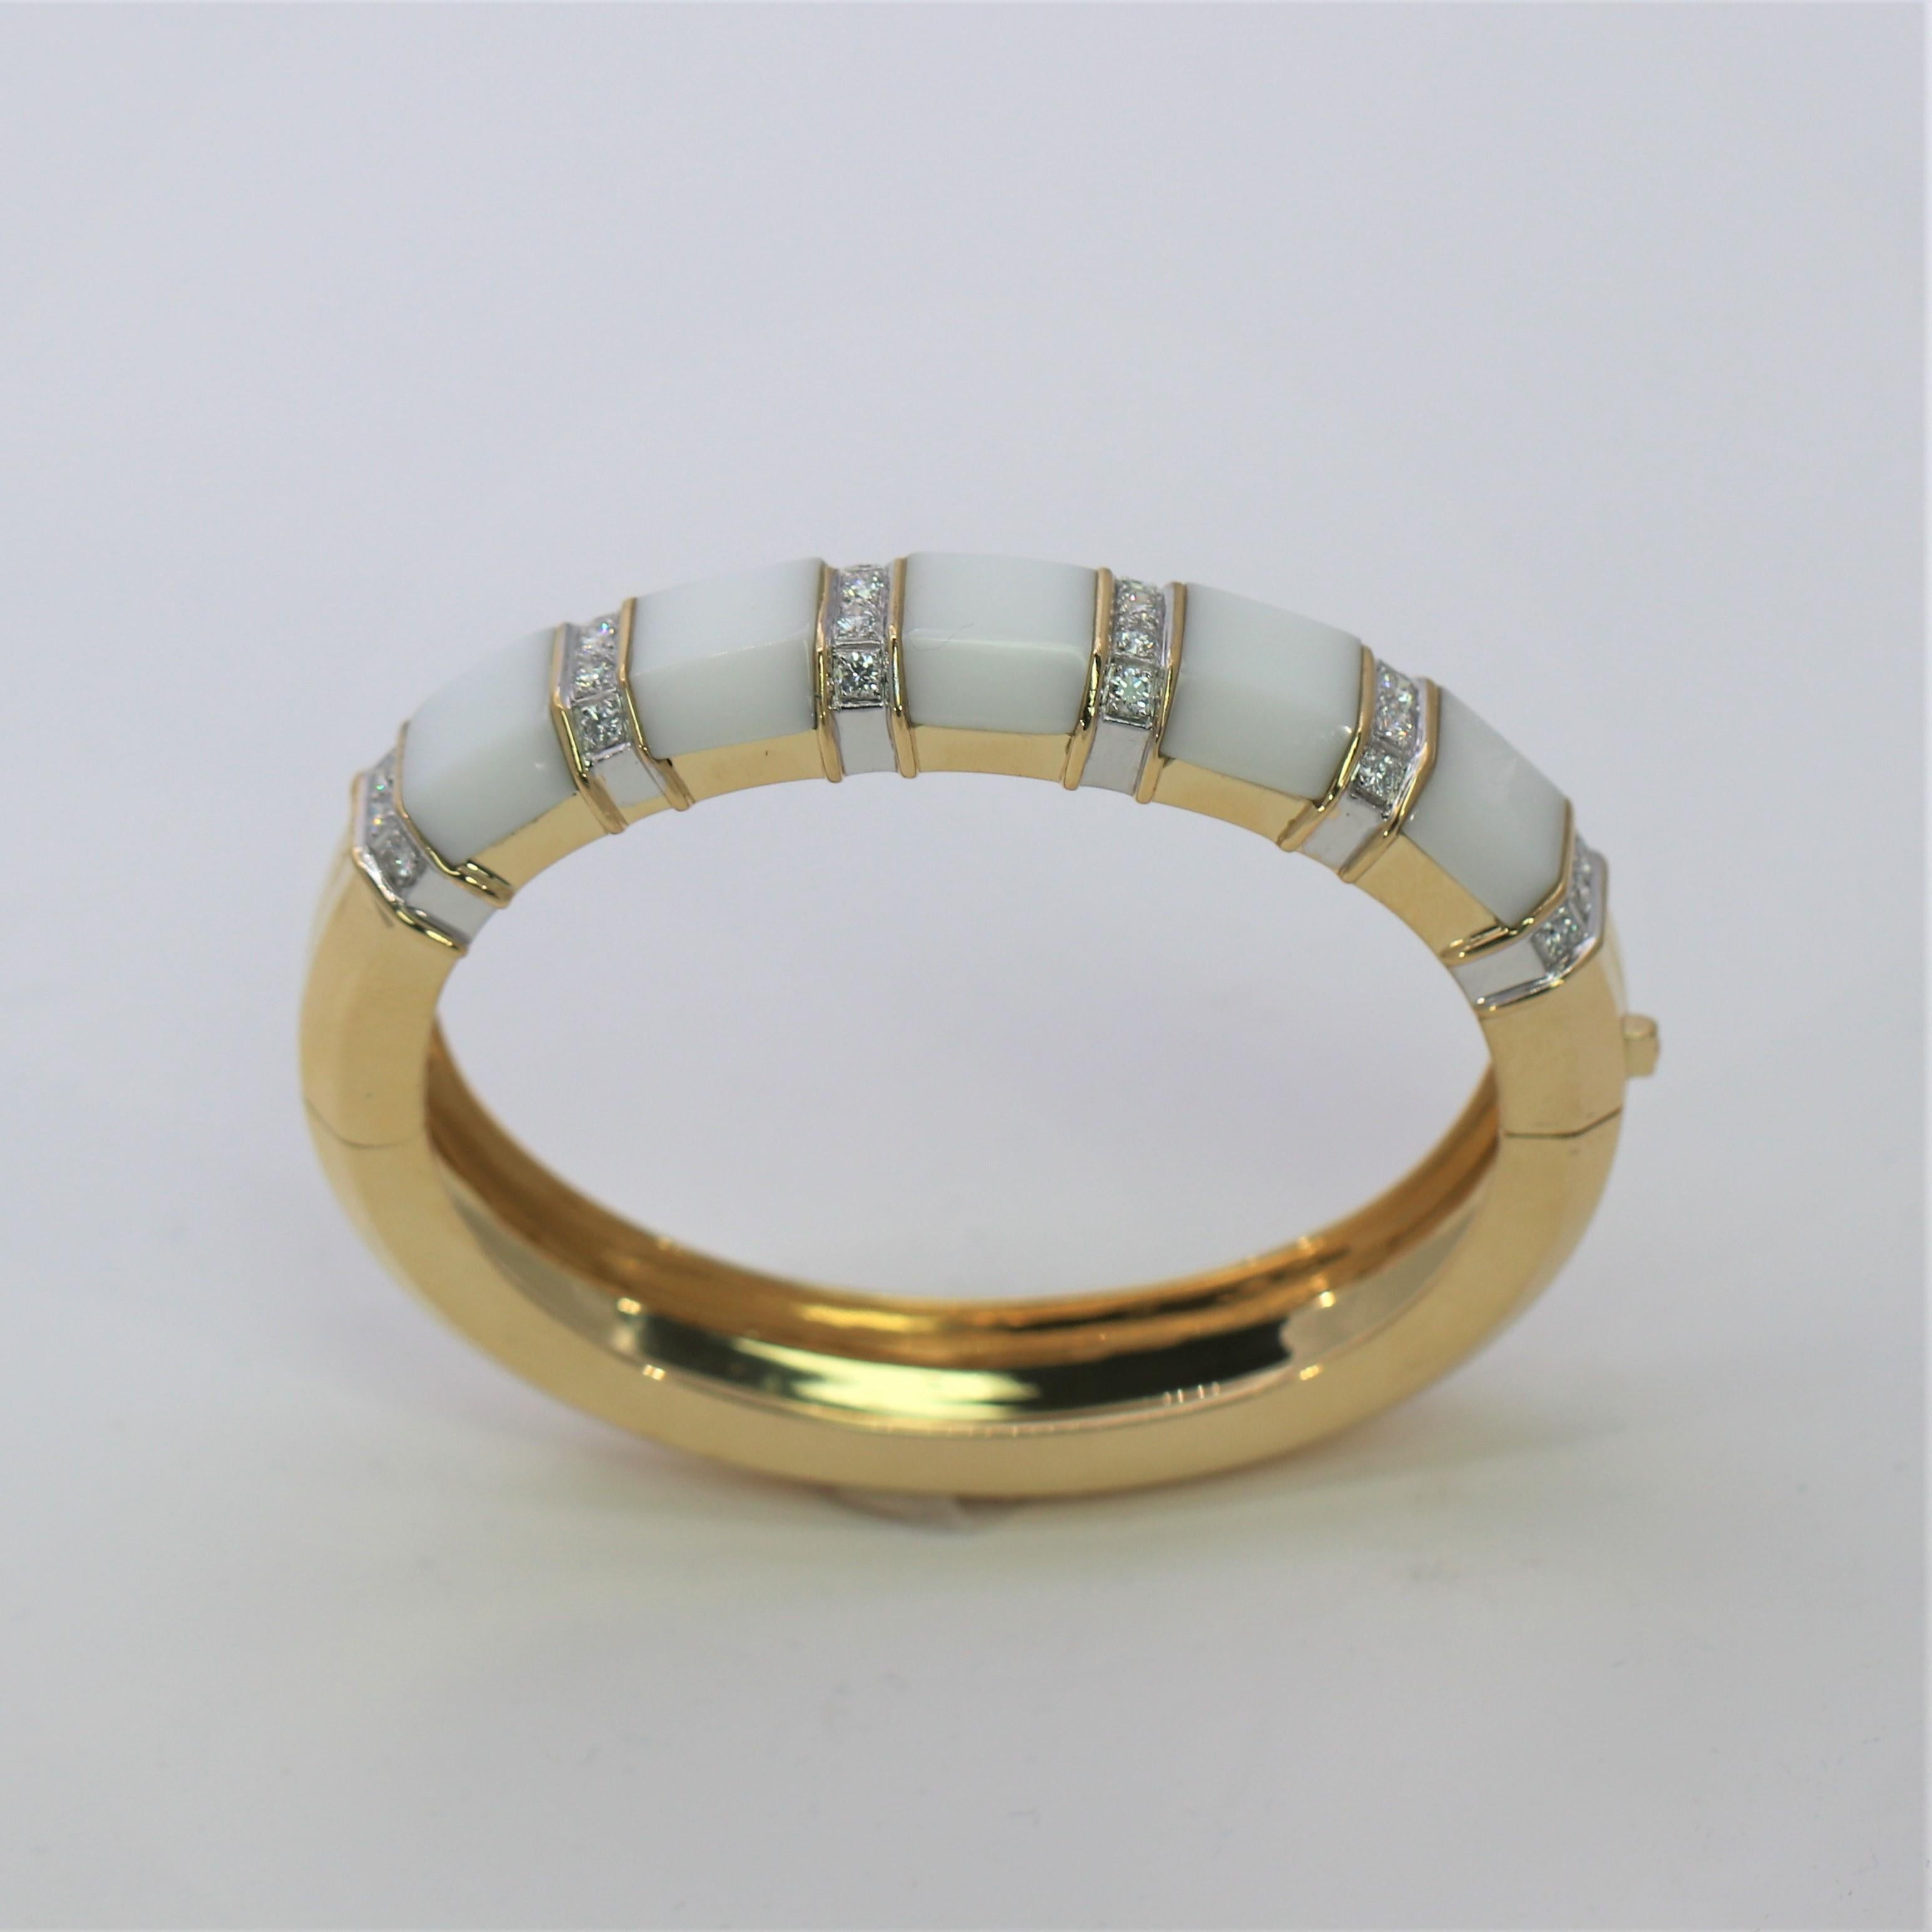 A great every day bangle for any woman who wants an outstanding casual bracelet. It is smart, tailored and elegant, all at the same time. Made of 18K Yellow Gold and set with 24 round brilliant cut diamonds weighing an approximate total of 1.25Ct of